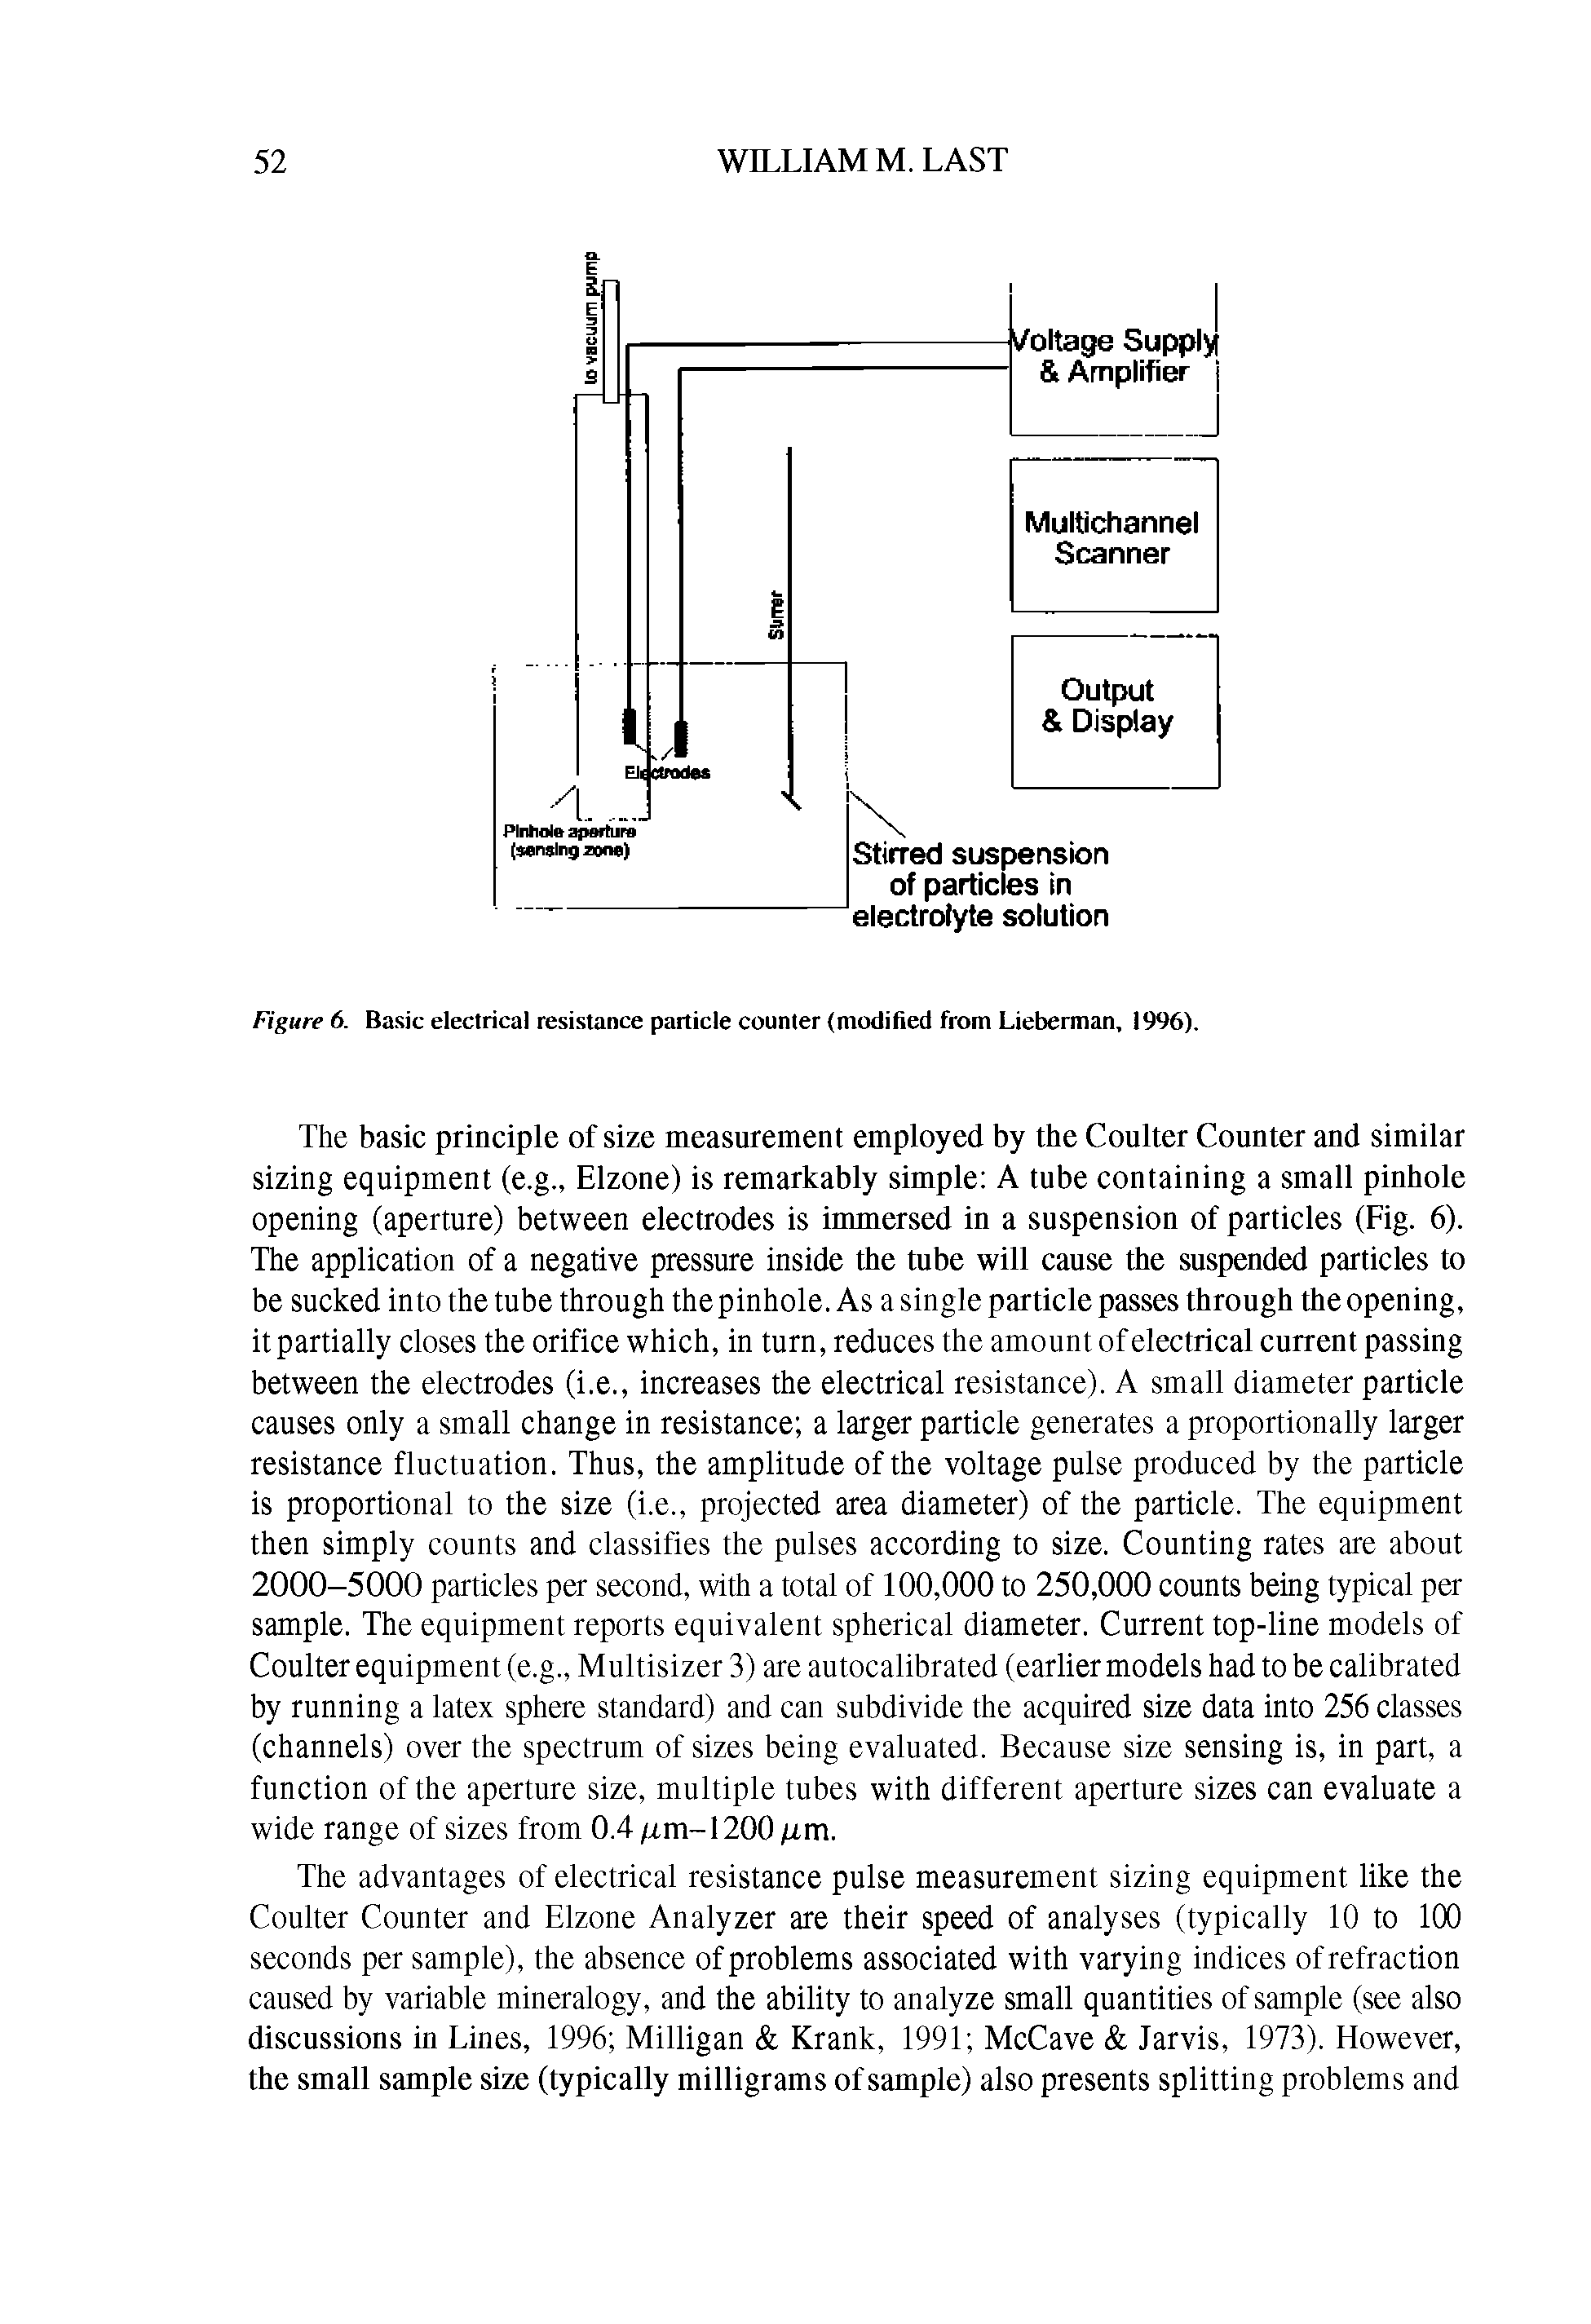 Figure 6. Basic electrical resistance particle counter (modified from Lieberman, 1996).